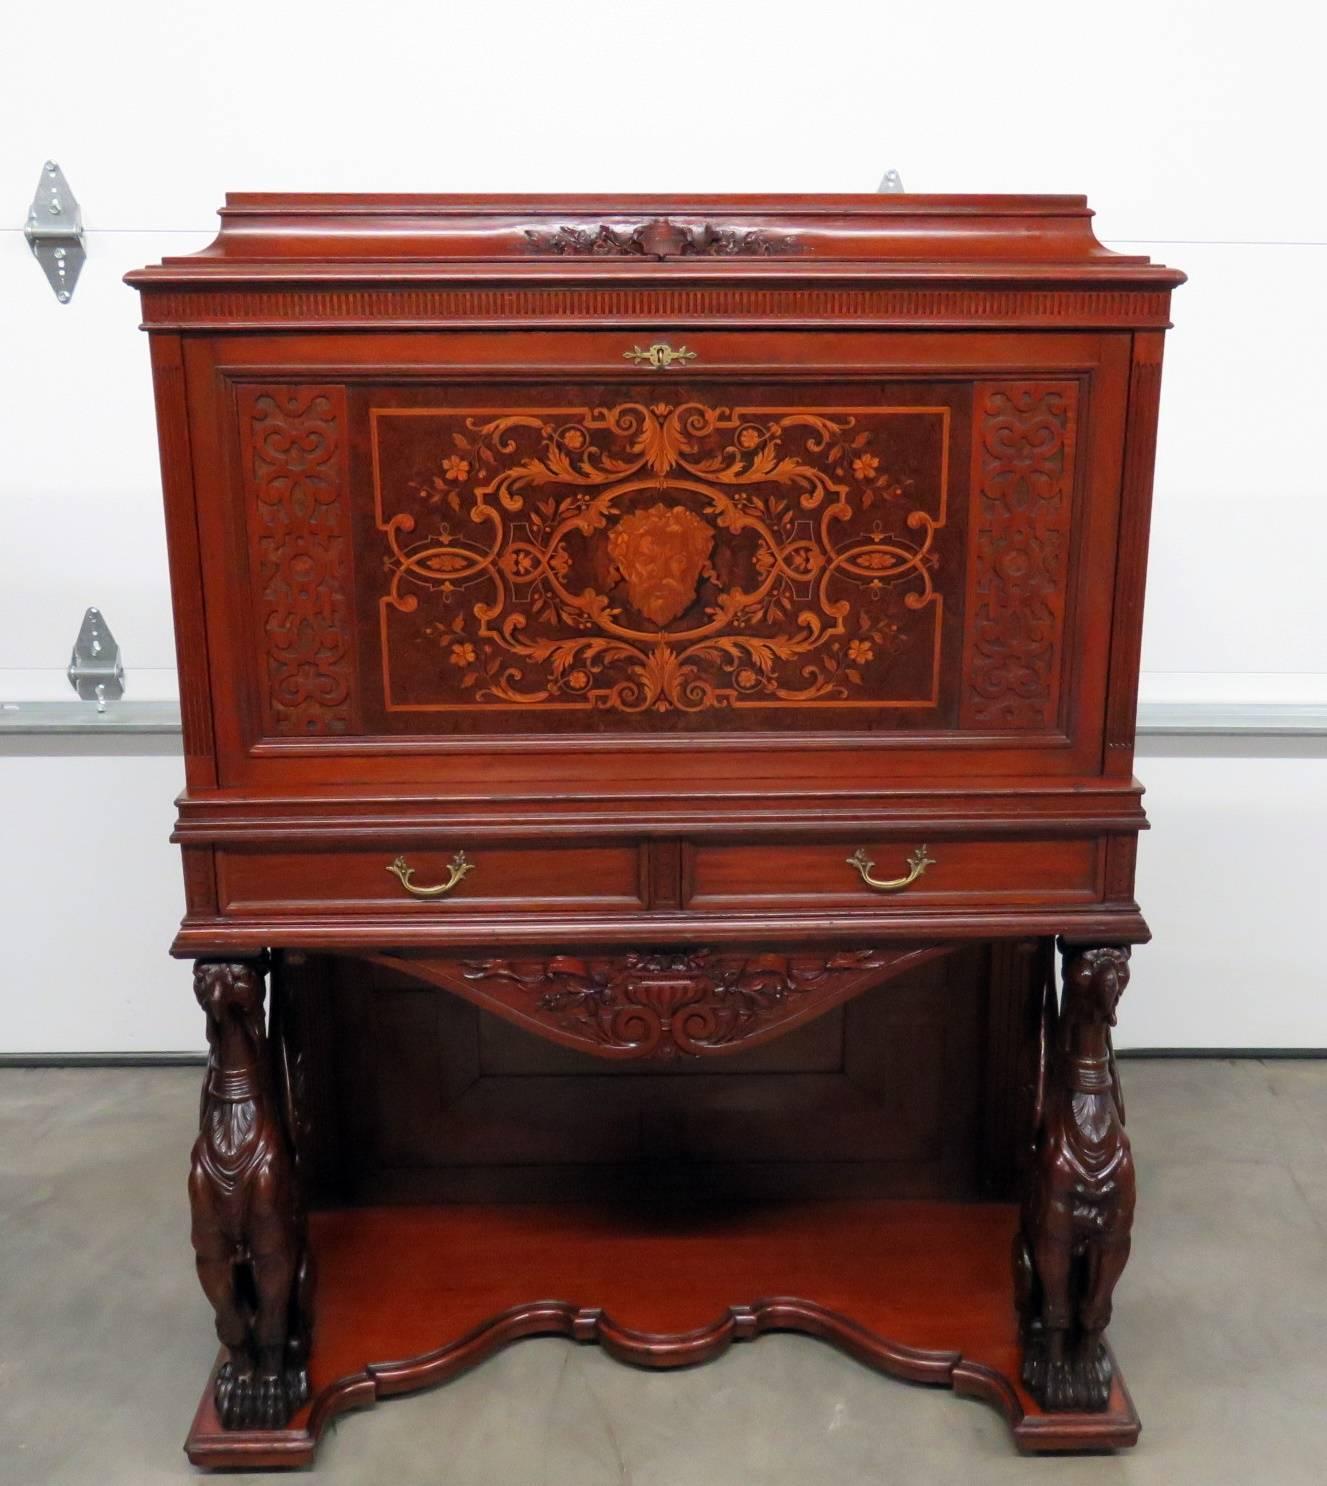 Rare Victorian inlaid Philadelphia desk by Daniel Pabst. Winged griffins with a drop desk over two drawers.